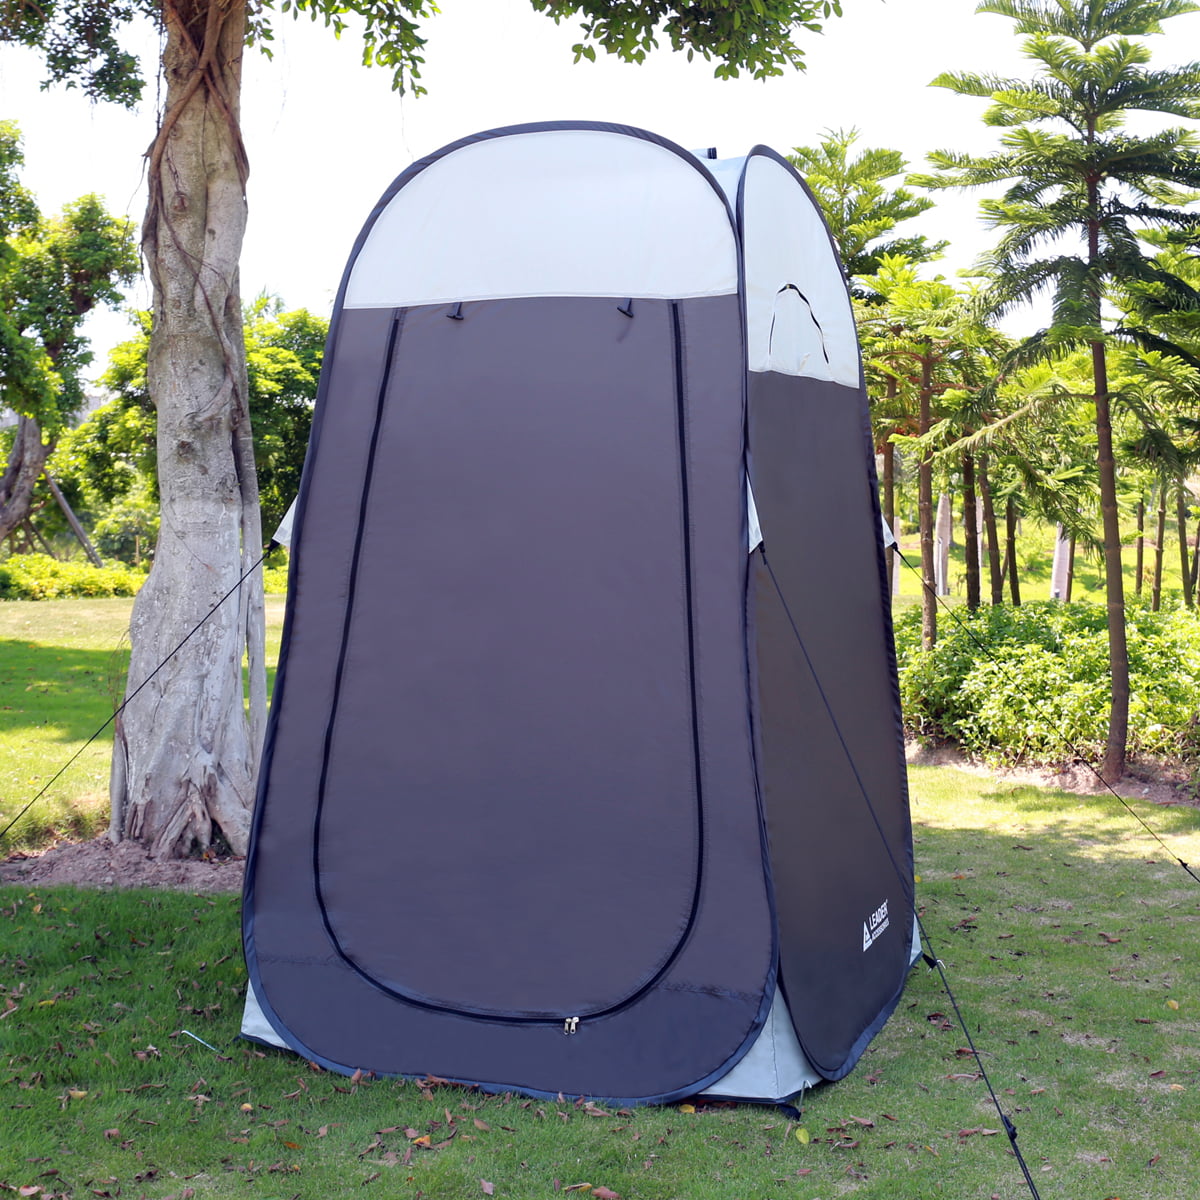 Big Size H Renewed Leader Accessories Pop Up Shower Tent Dressing Changing Tent Pod Toilet Tent 4 x 4 x 78 